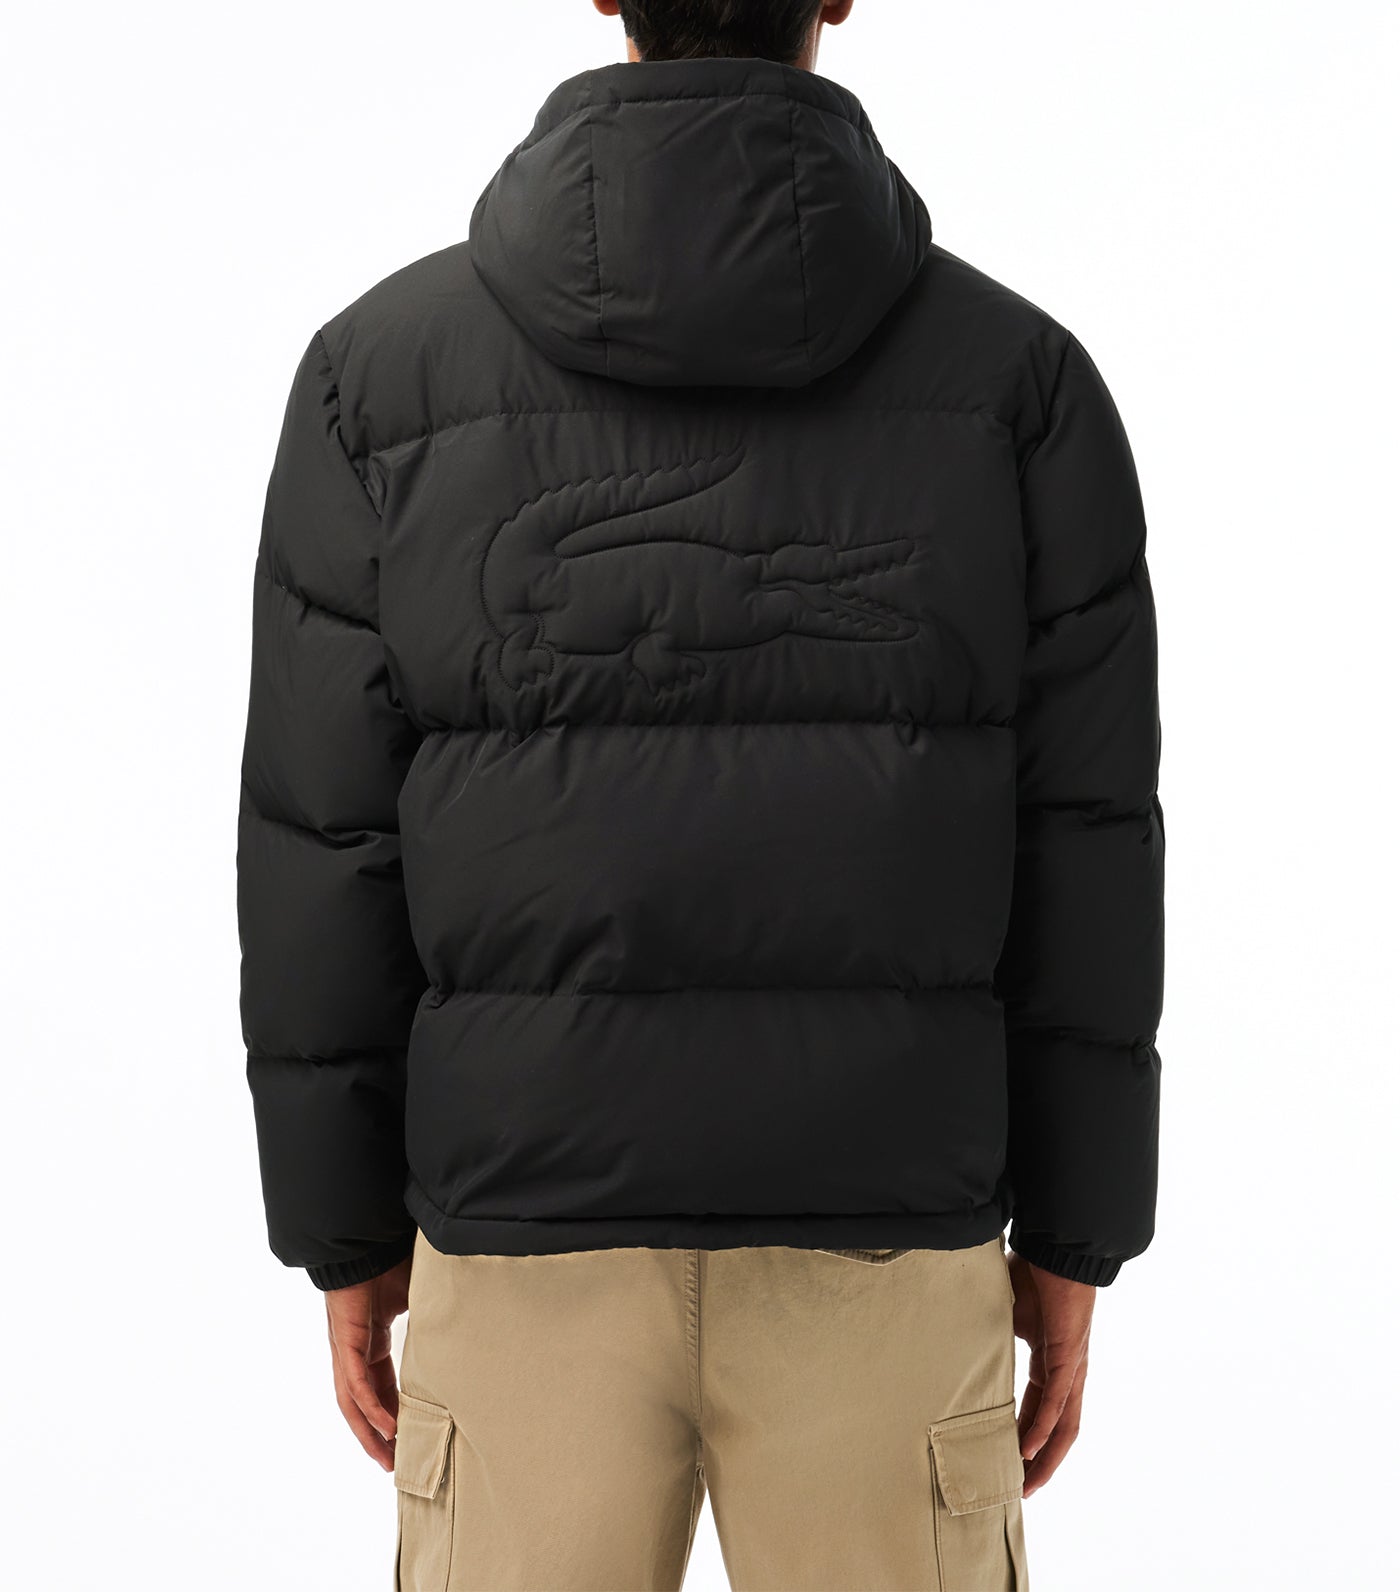 Showerproof Down Jacket with Quilted Croc Black